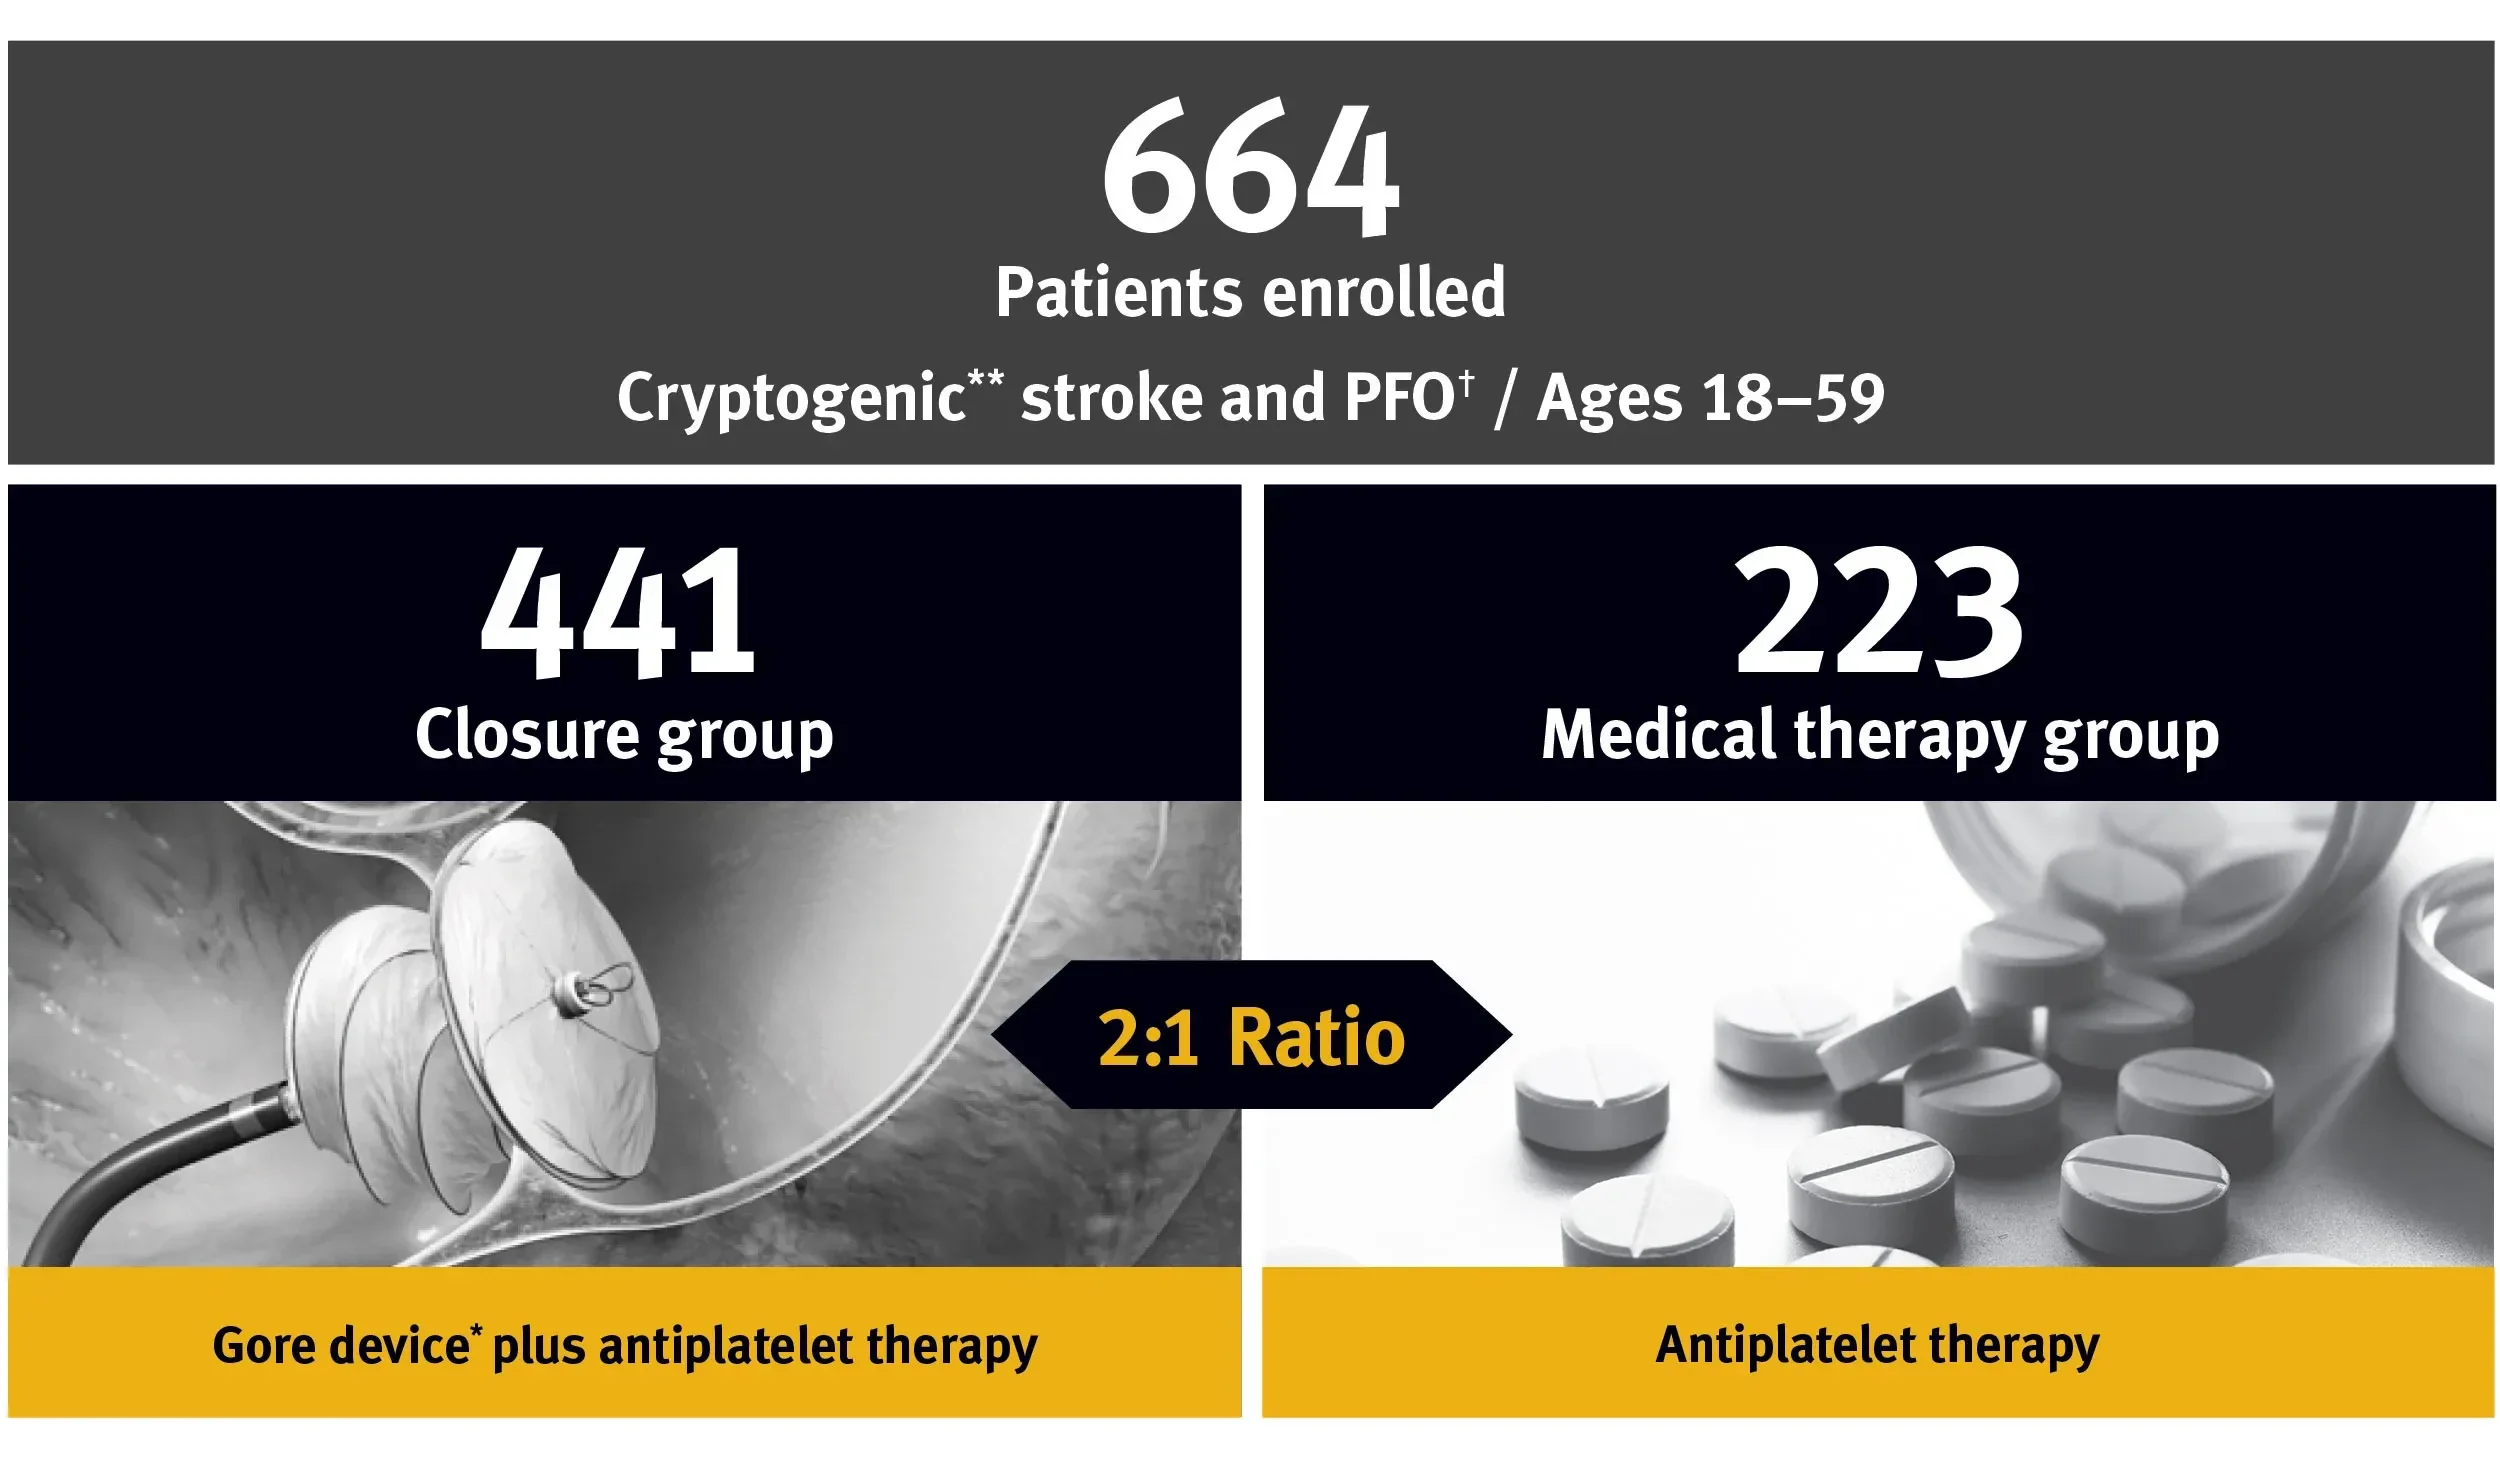 664 Patients enrolled, Cryptogenic** stroke and PFO† / Ages 18–59 - 2:1 Ratio - 441 Closure group, Gore device* plus antiplatelet therapy and 223 Medical therapy group, Antiplatelet therapy